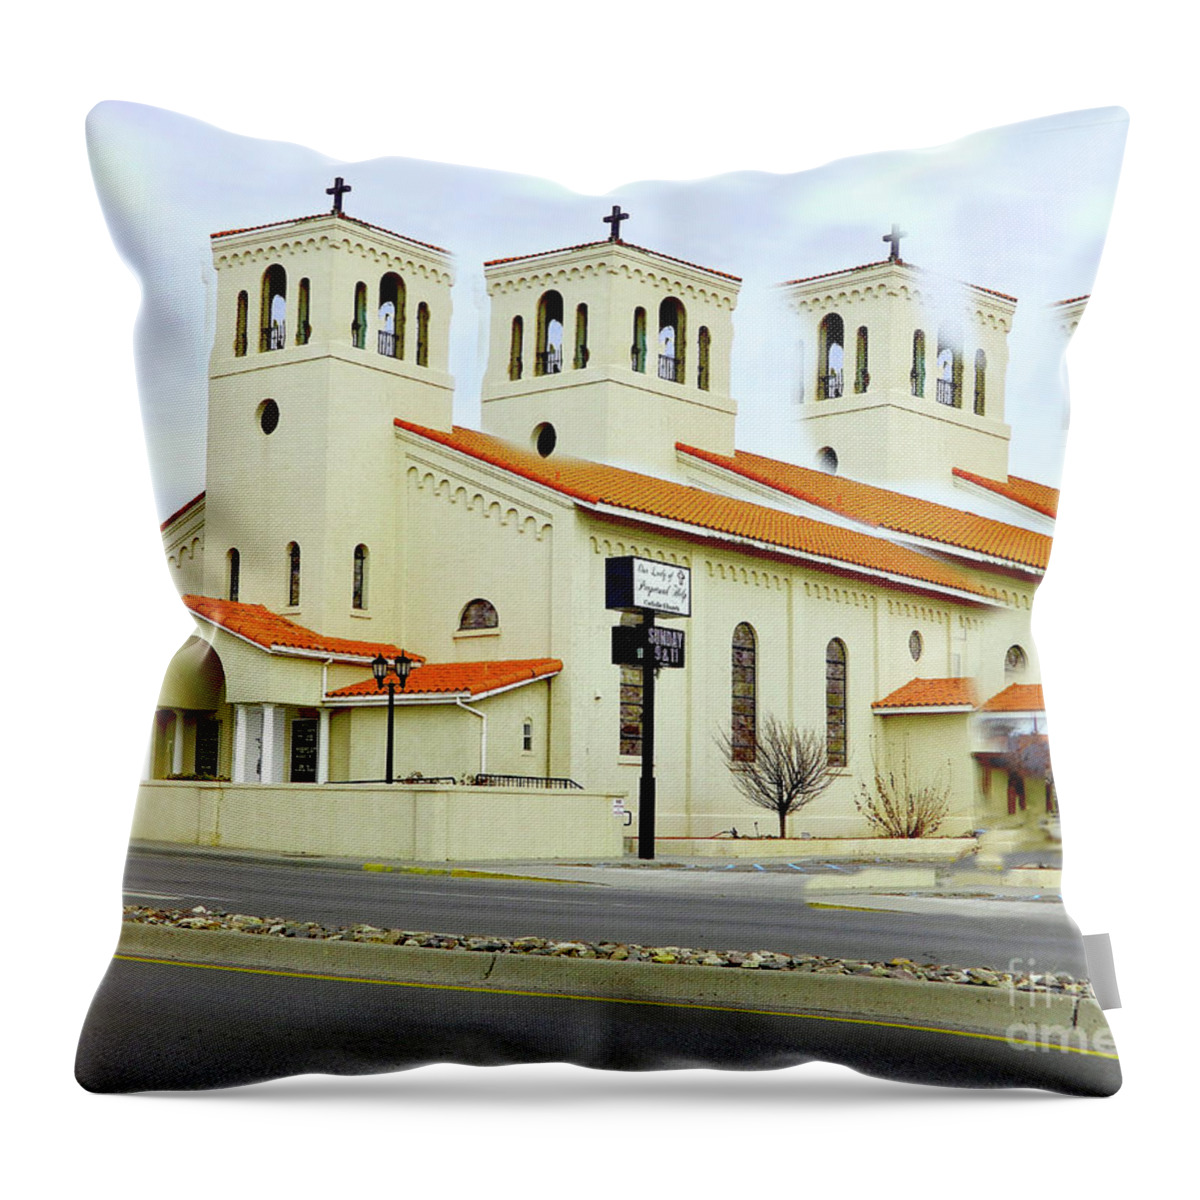 Digital Art Throw Pillow featuring the digital art Church in New Mexico Multiplied by Karen Francis